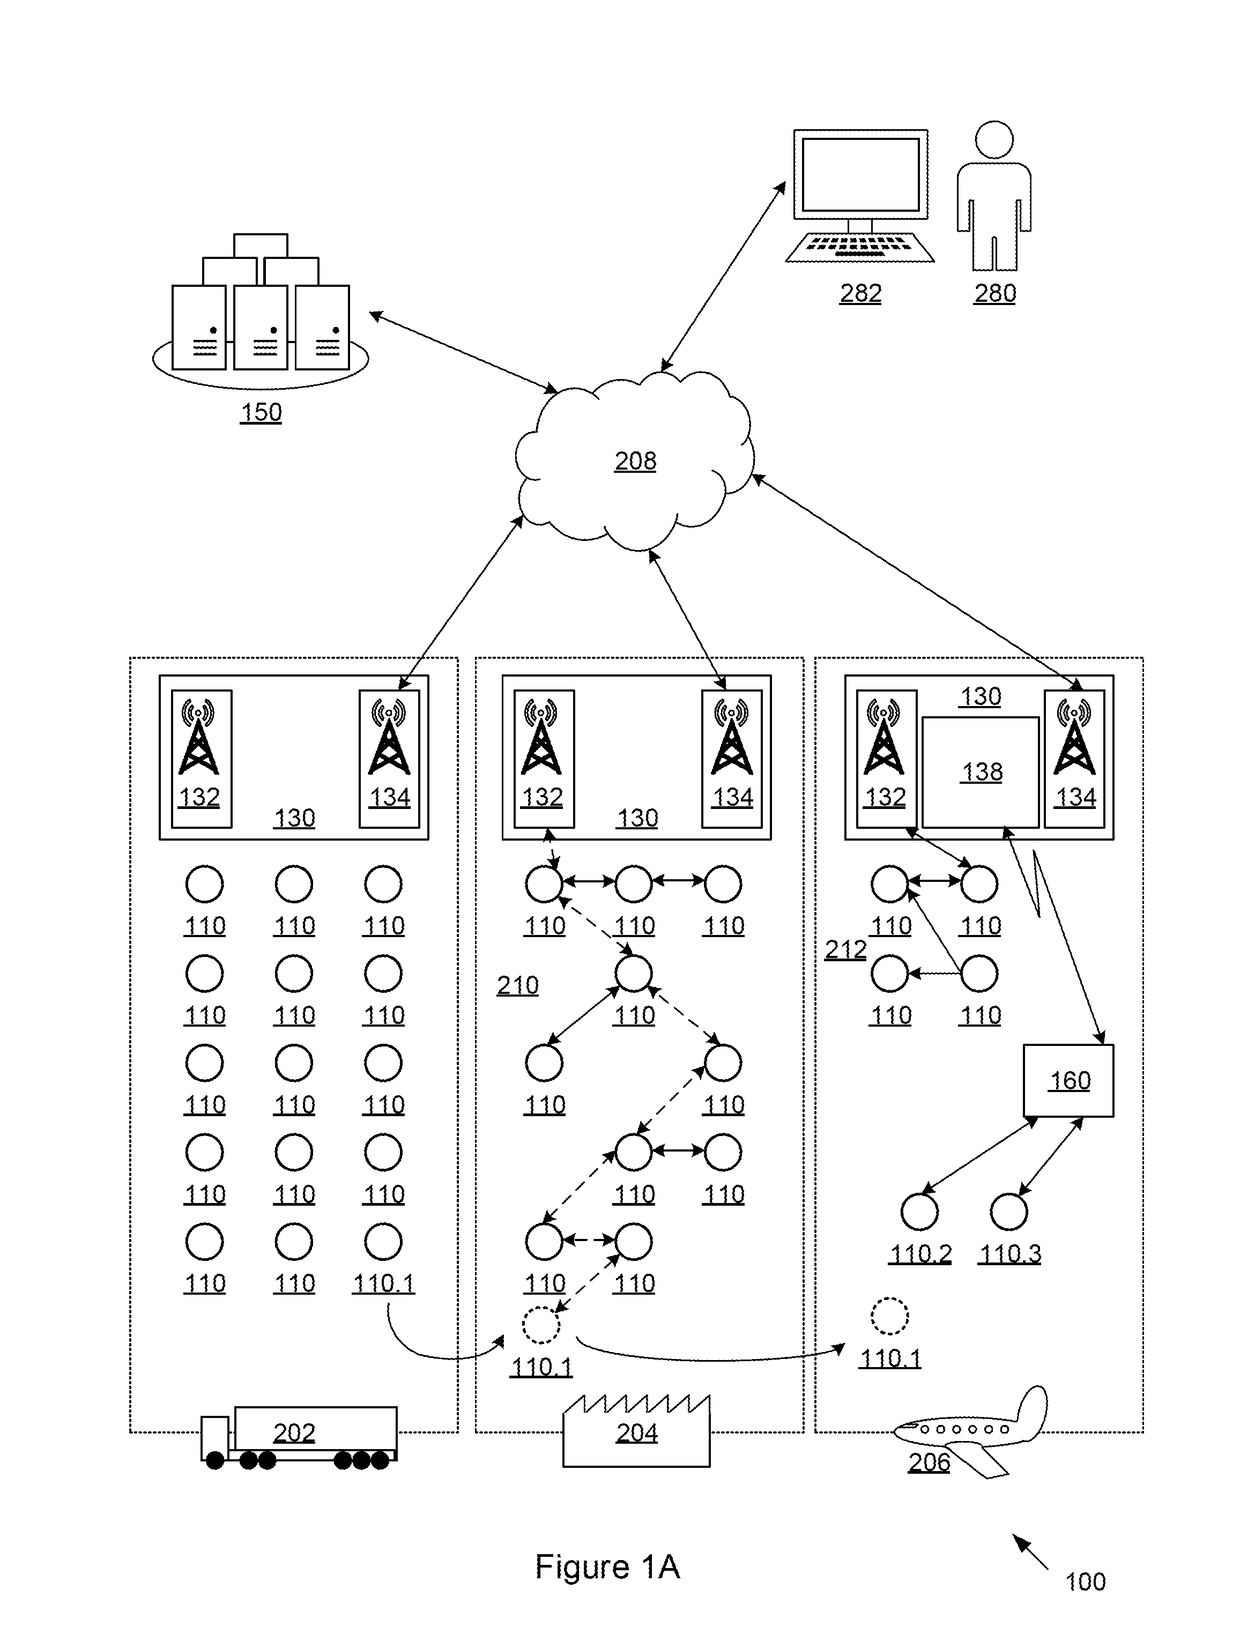 Network and a method for associating a mobile monitoring device in a network based on comparison of data with other network devices